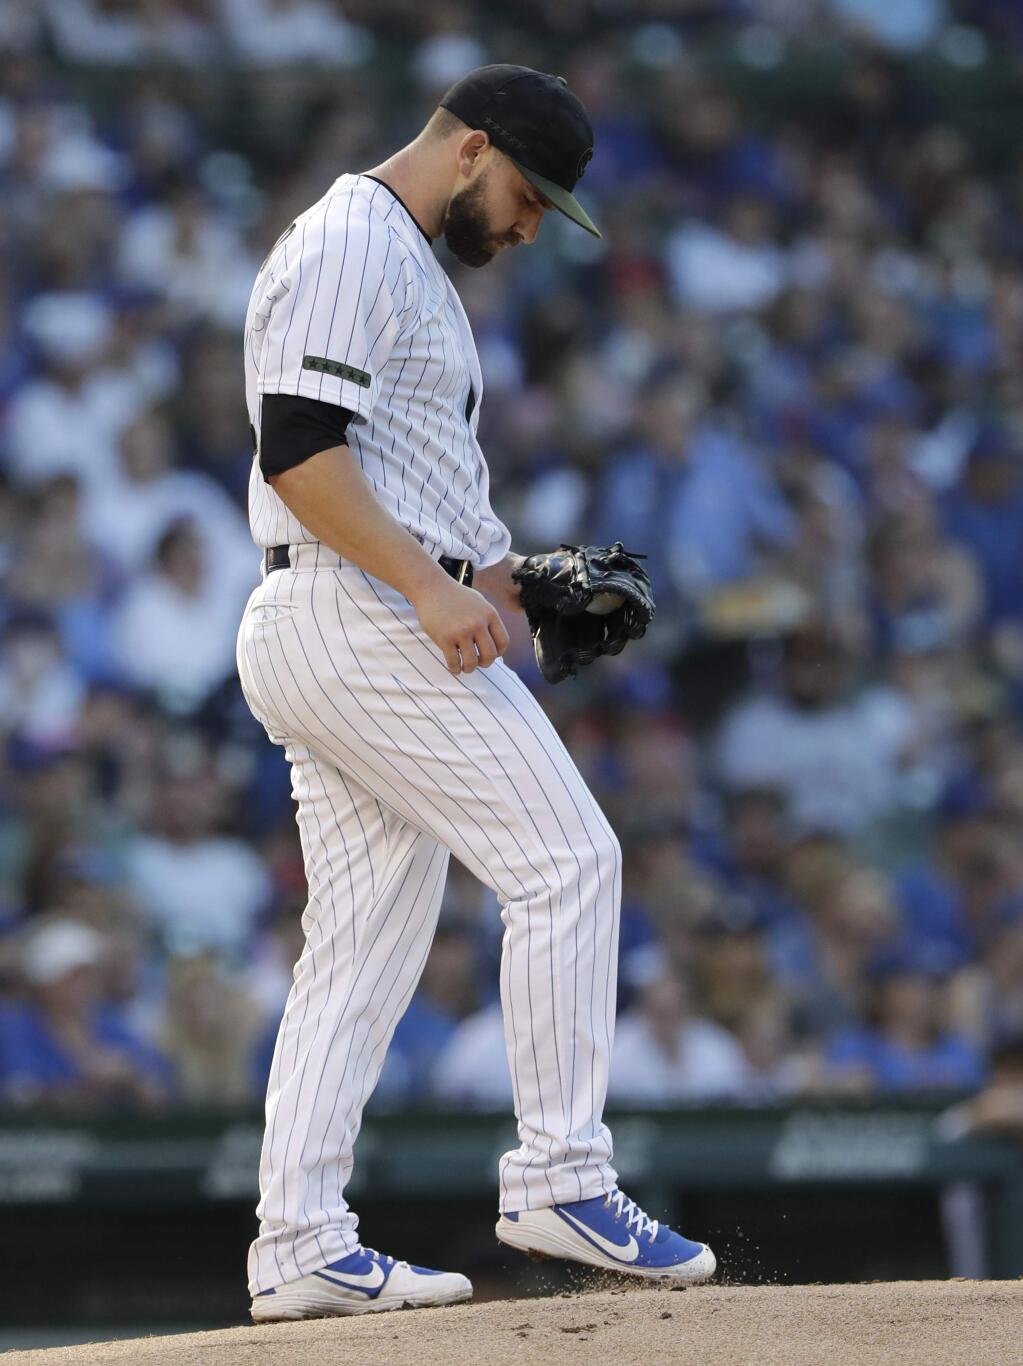 Chicago Cubs starting pitcher Tyler Chatwood kicks the mound during the first inning of a baseball game against the San Francisco Giants in Chicago, Sunday, May 27, 2018. (AP Photo/Nam Y. Huh)